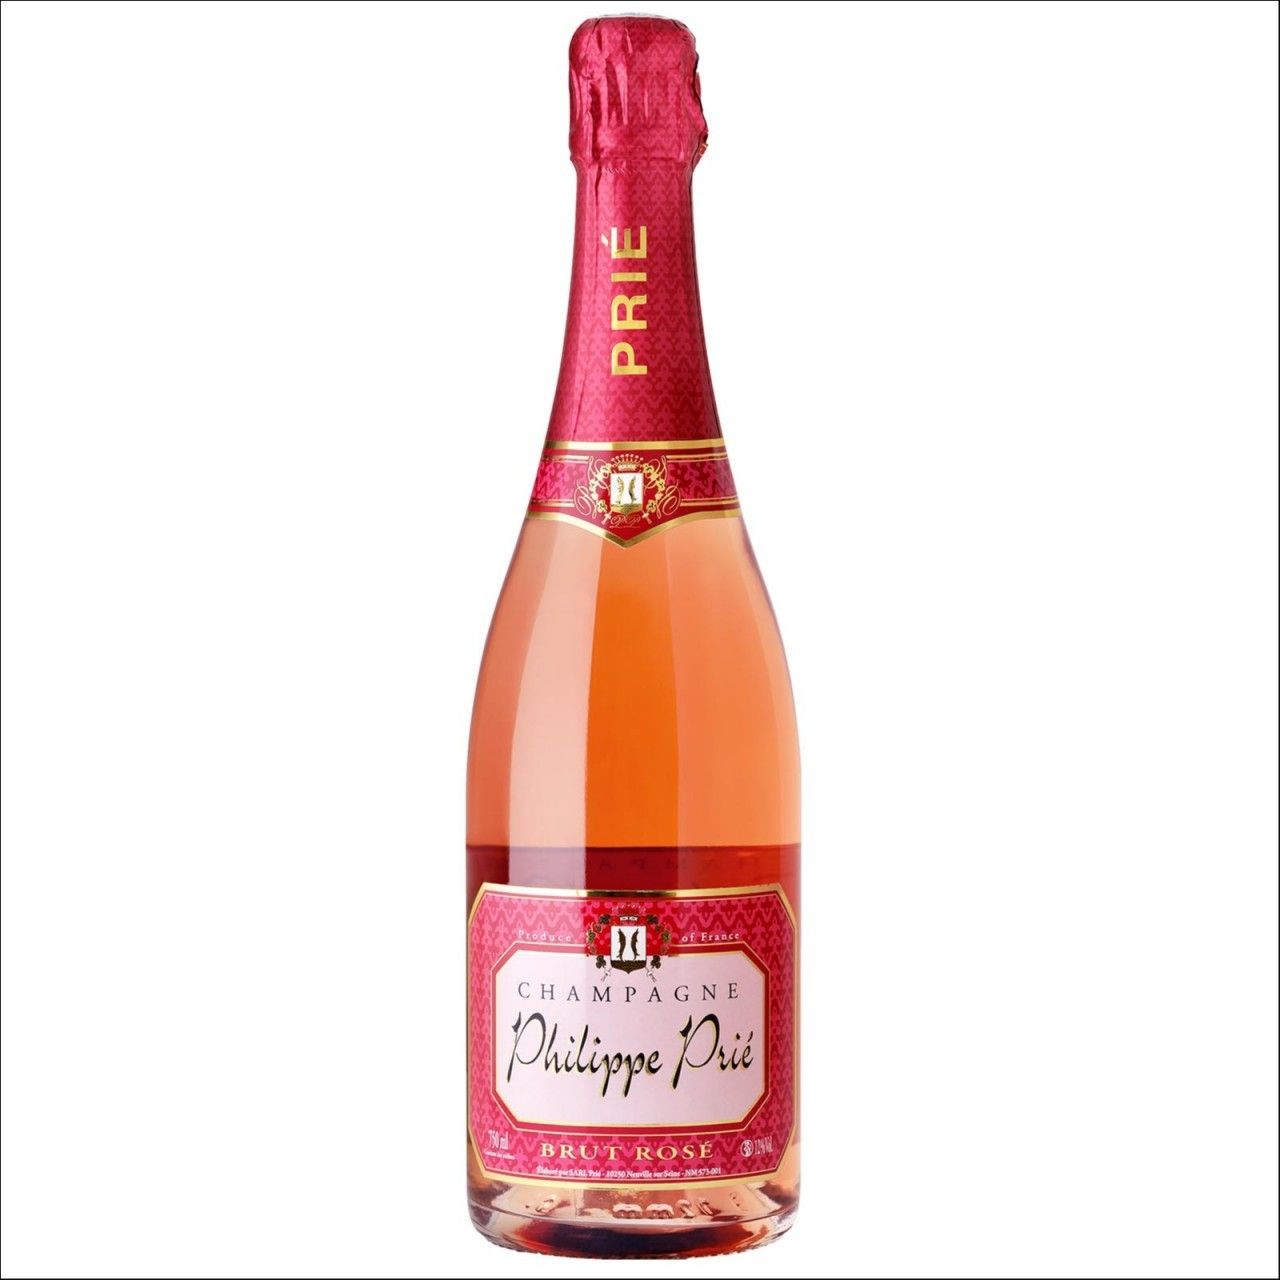 CHRYSOBULLE BY PRIE - CHAMPAGNE - Brut Rosé 